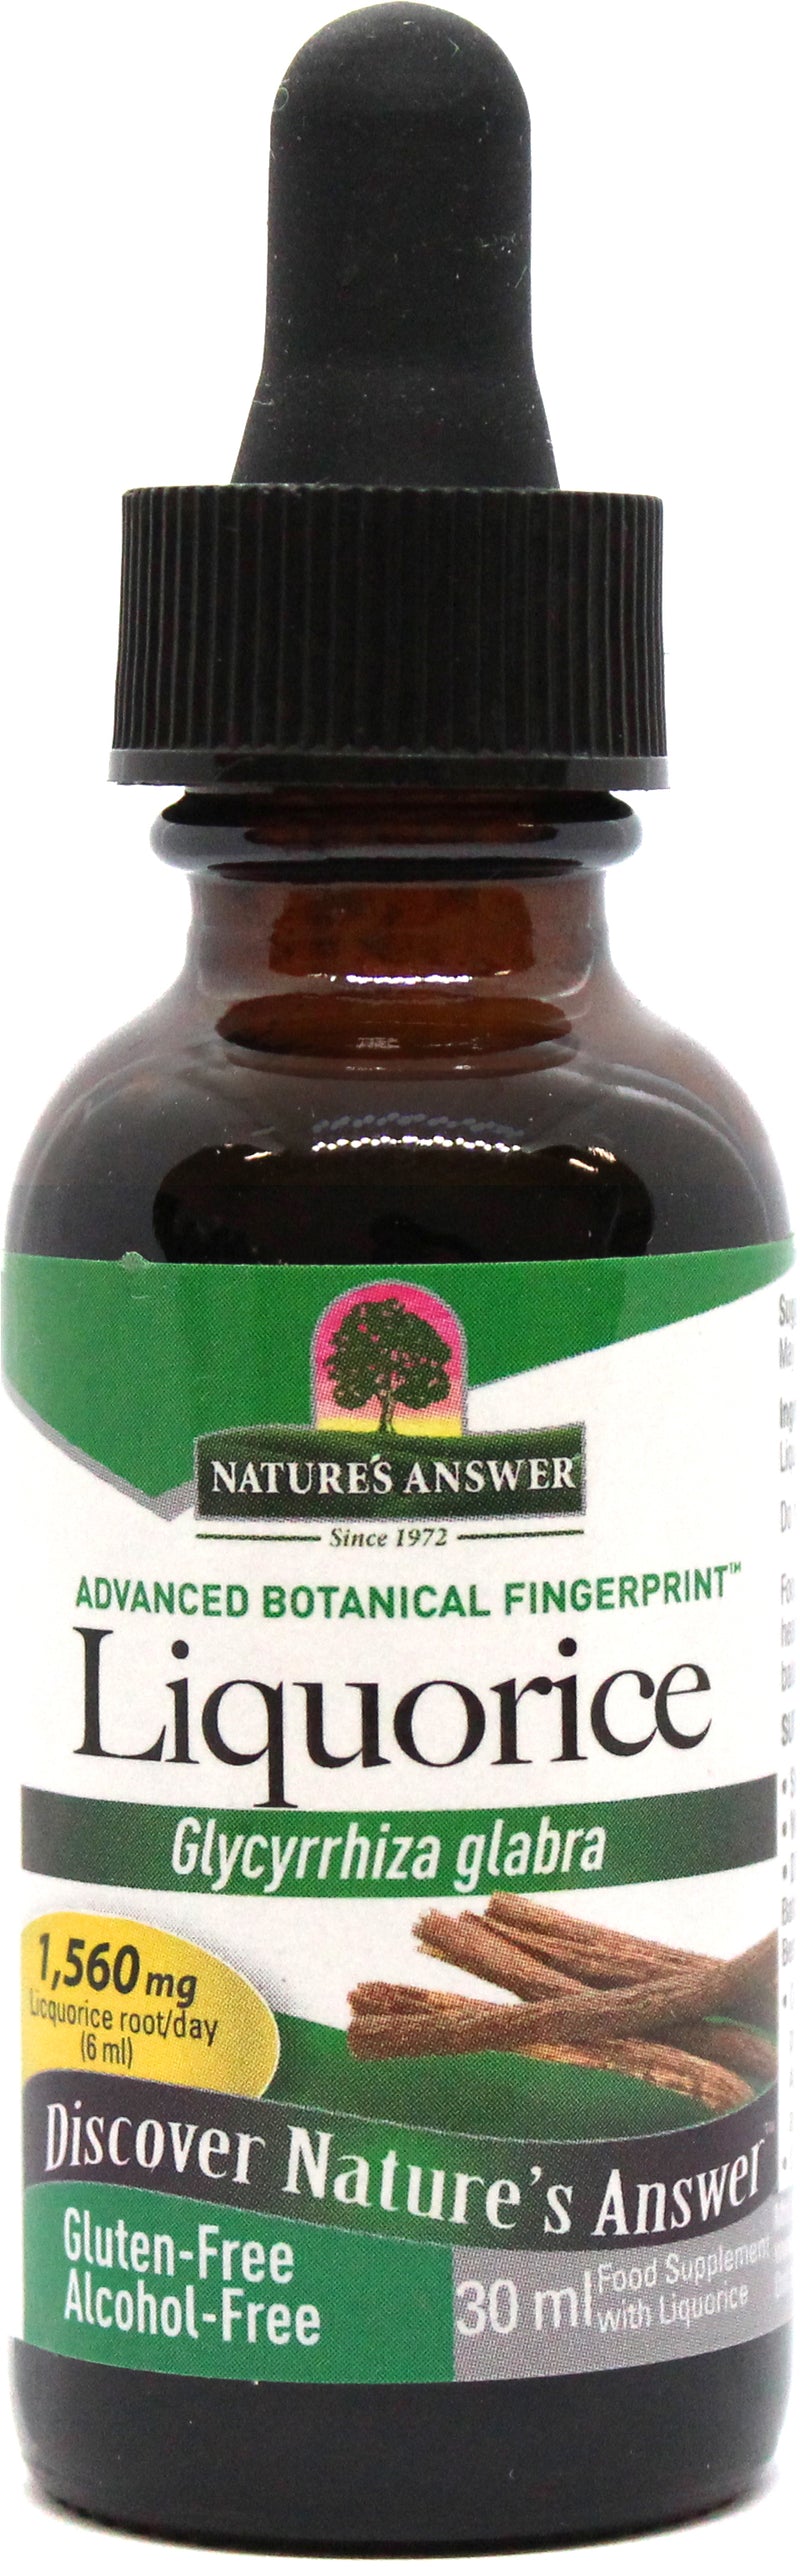 Nature’s Answer Liquorice Root (Alcohol-Free)